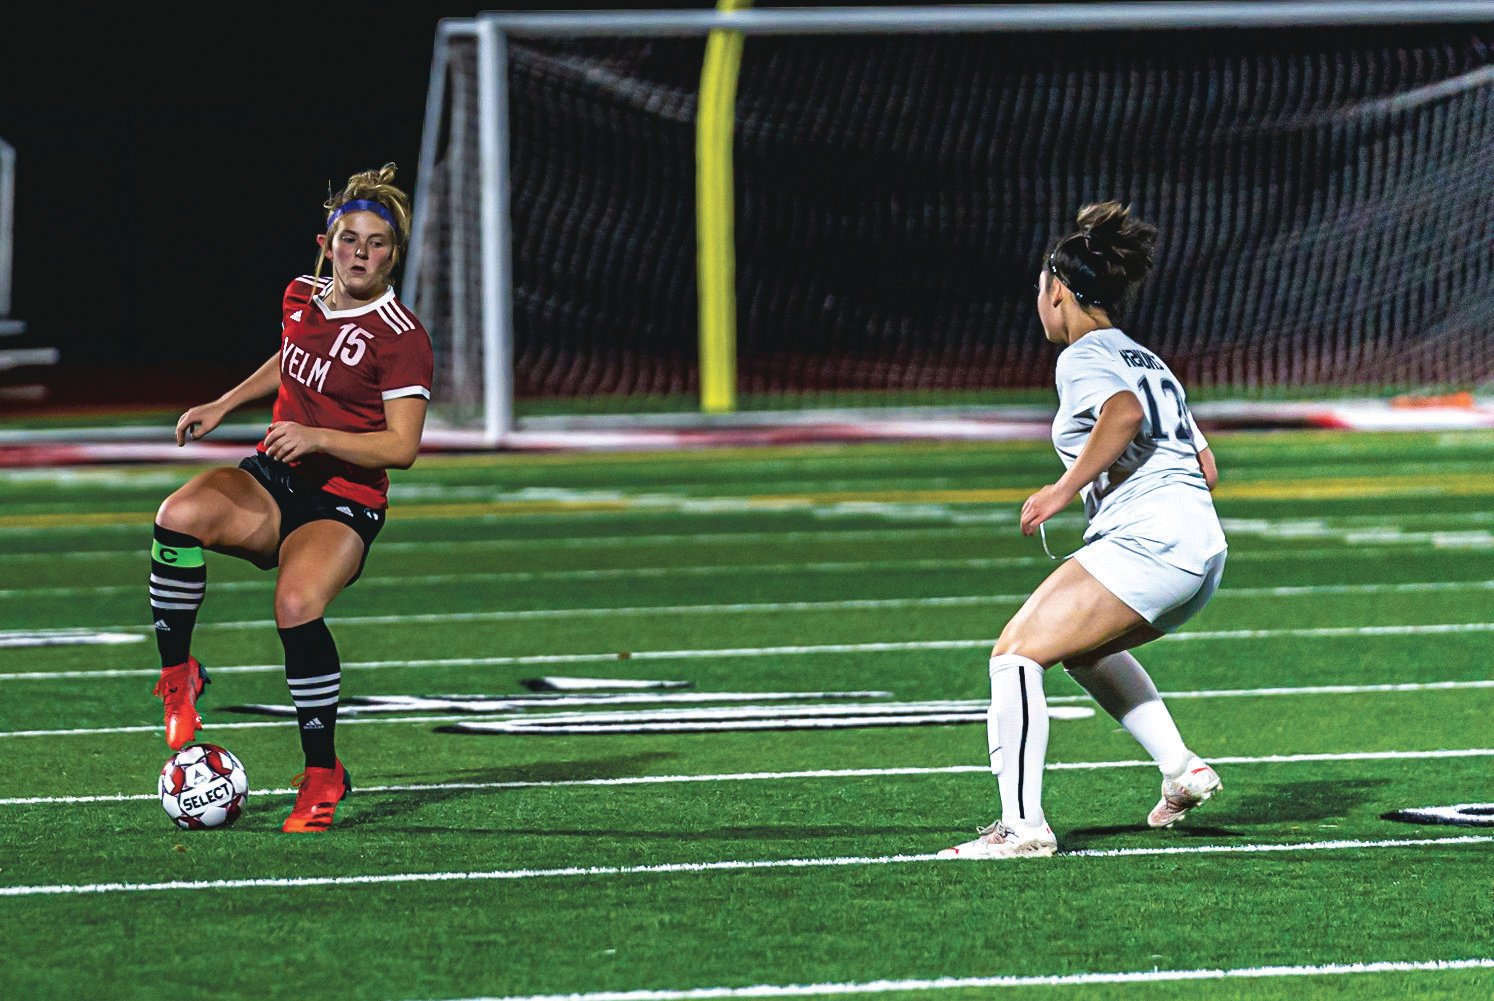 Meridee Hill dribbles the soccer ball during a 2021 Yelm girls soccer matchup.